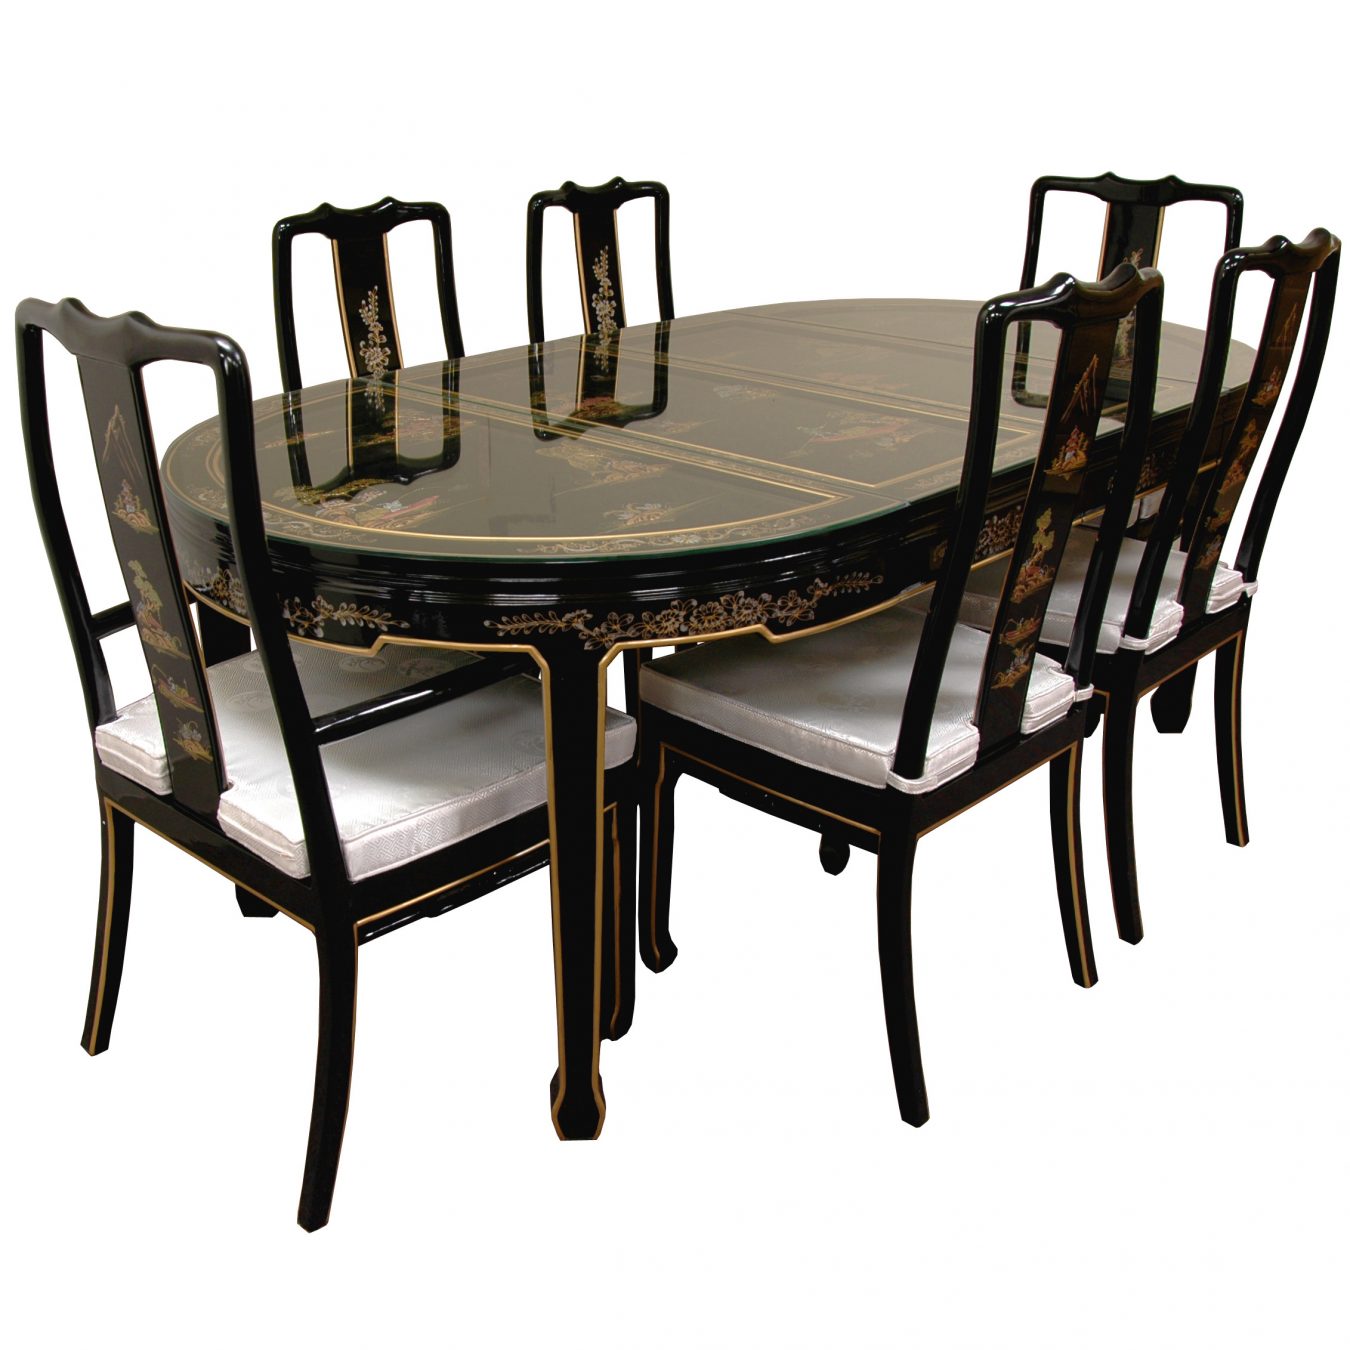 Black Dining Lacquer Room - Compare Prices, Reviews and Buy at